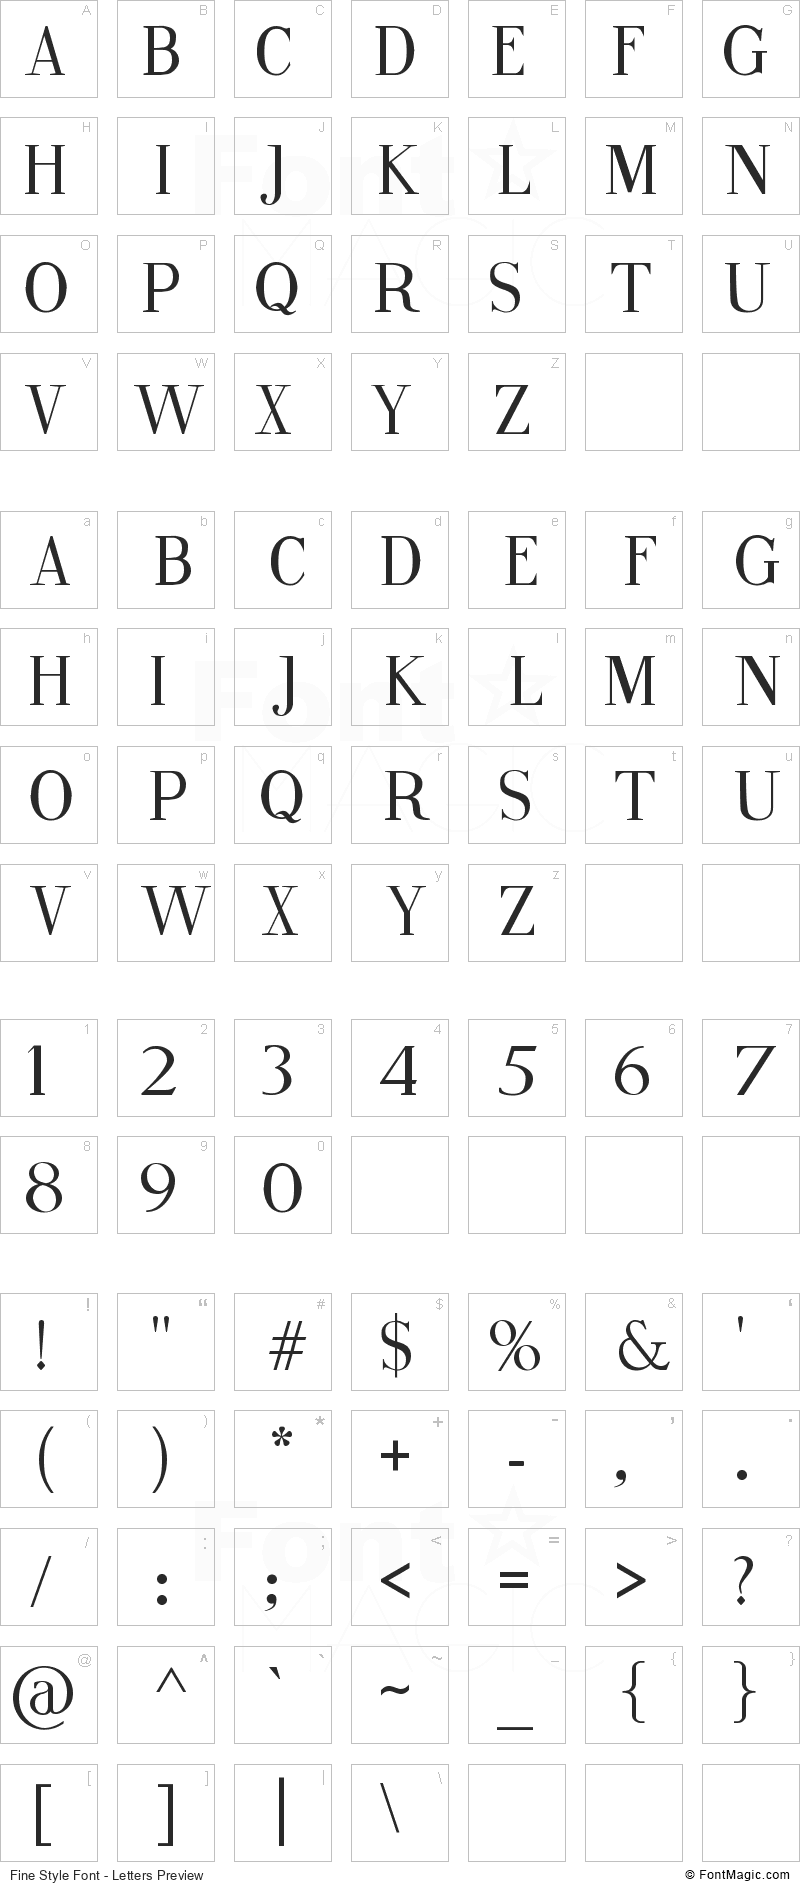 Fine Style Font - All Latters Preview Chart